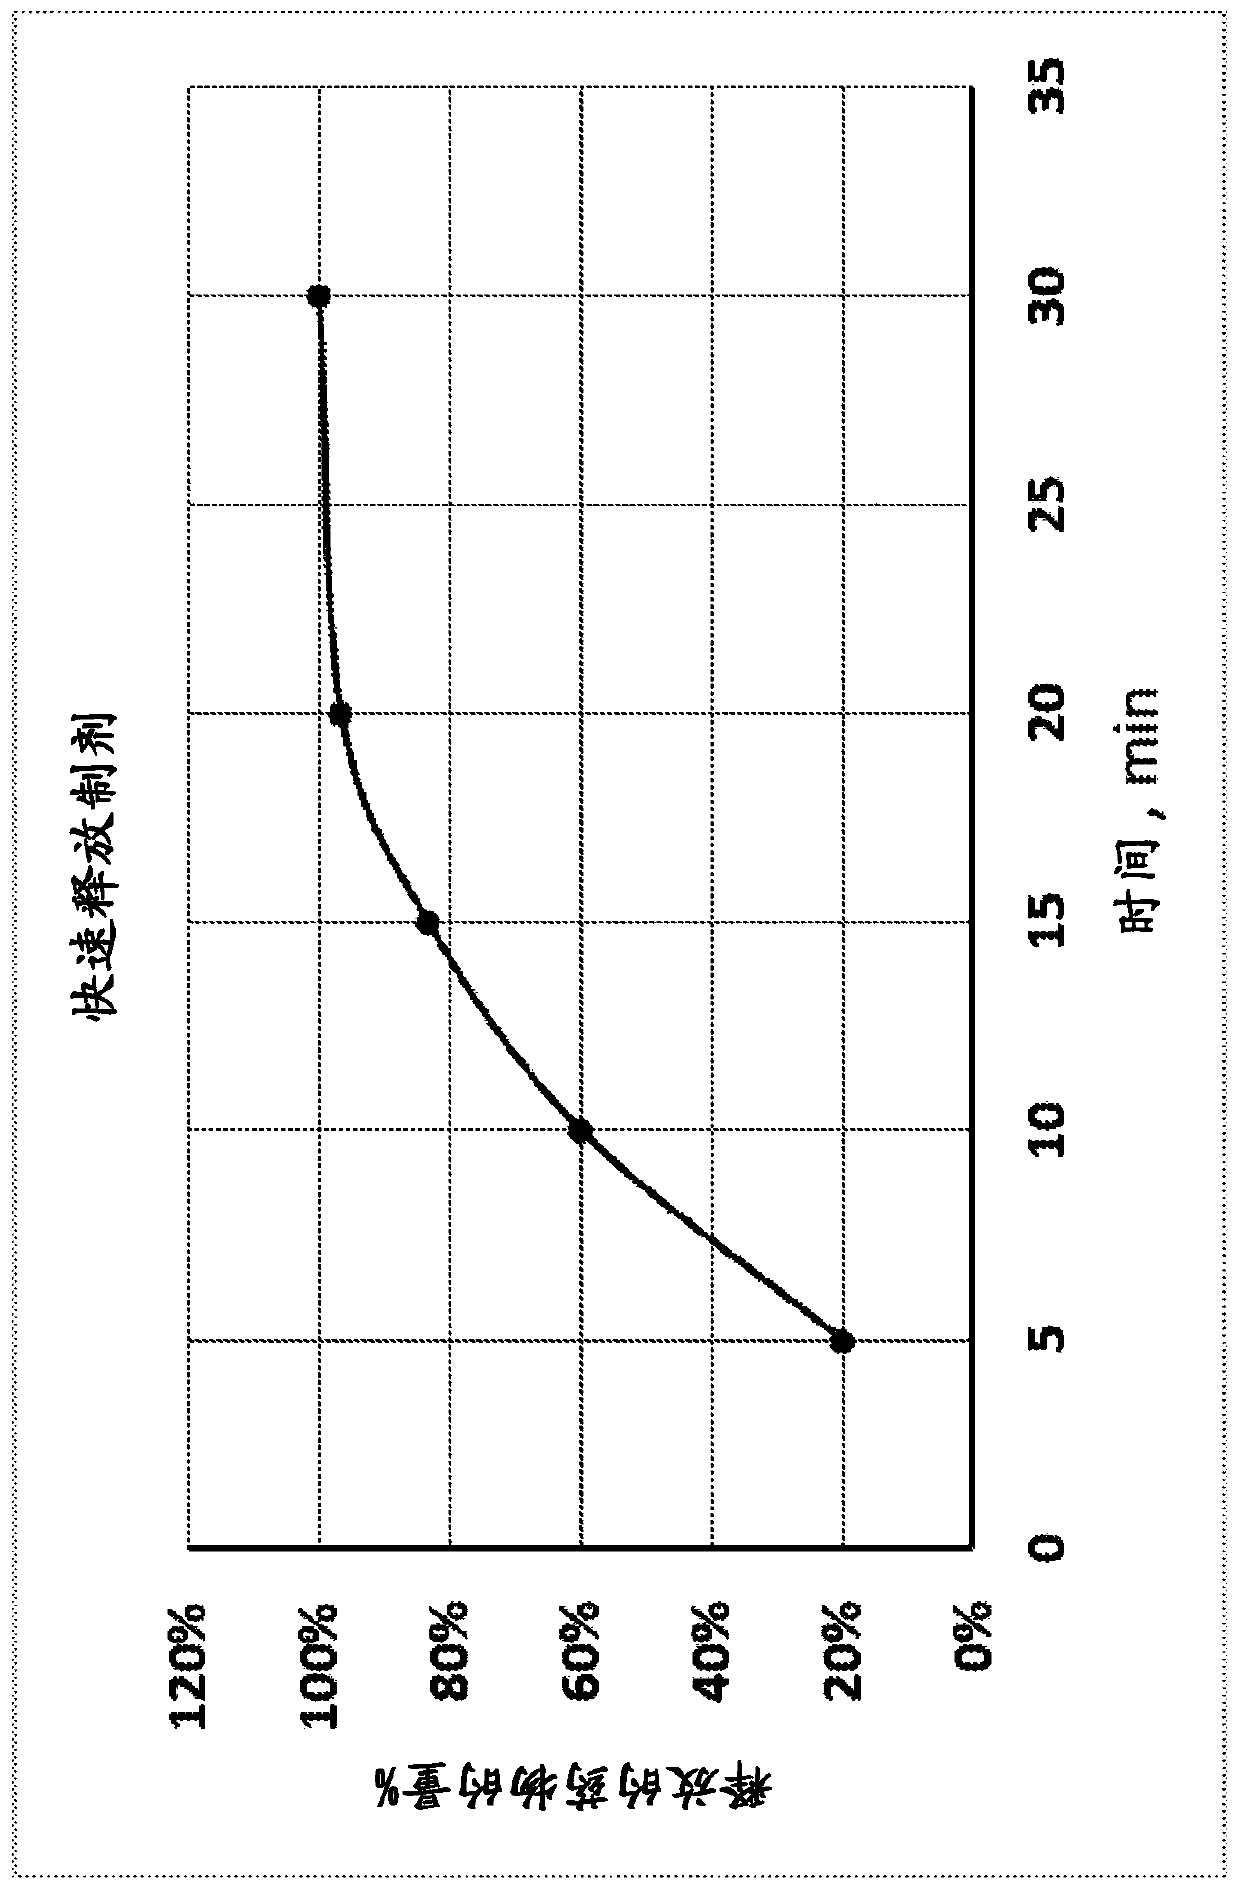 Isotretinoin oral-mucosal formulations and methods for using same